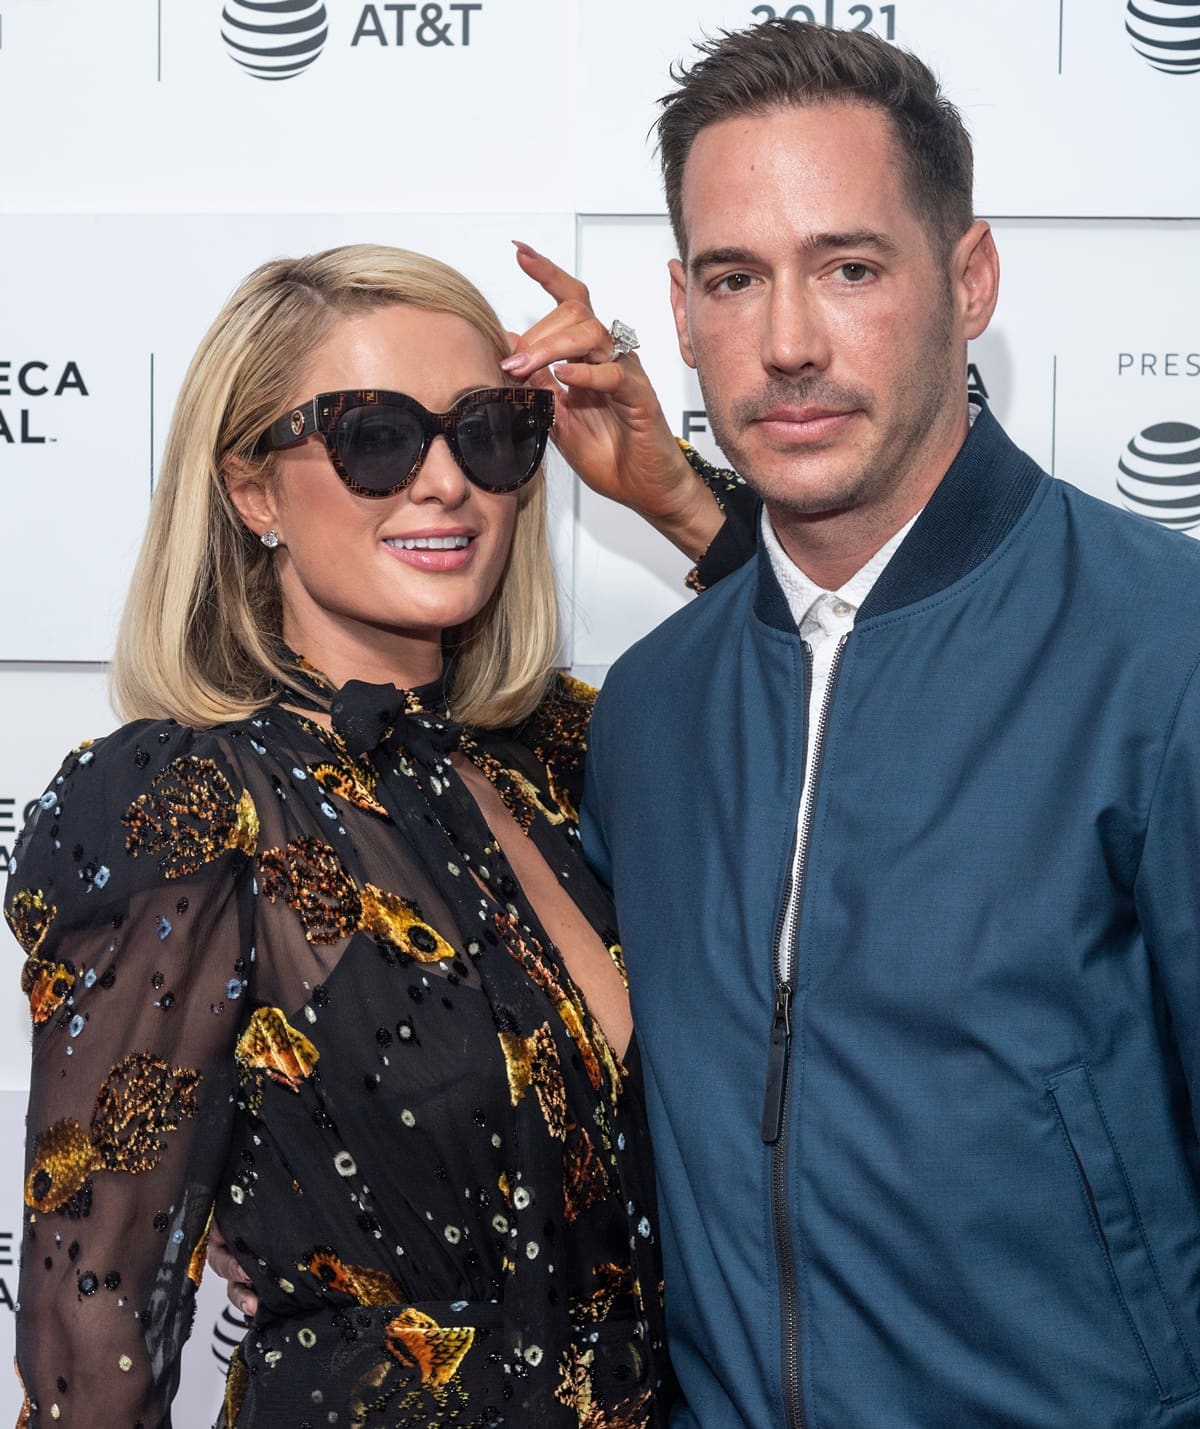 Paris Hilton and her husband, Carter Reum, welcomed their first child, a baby boy born via surrogate in January 2023; the couple named him Phoenix Barron Hilton Reum and have been open about their journey to parenthood after trying in vitro fertilization in 2021, with their romance starting in late 2019 and culminating in a luxurious wedding in November 2021